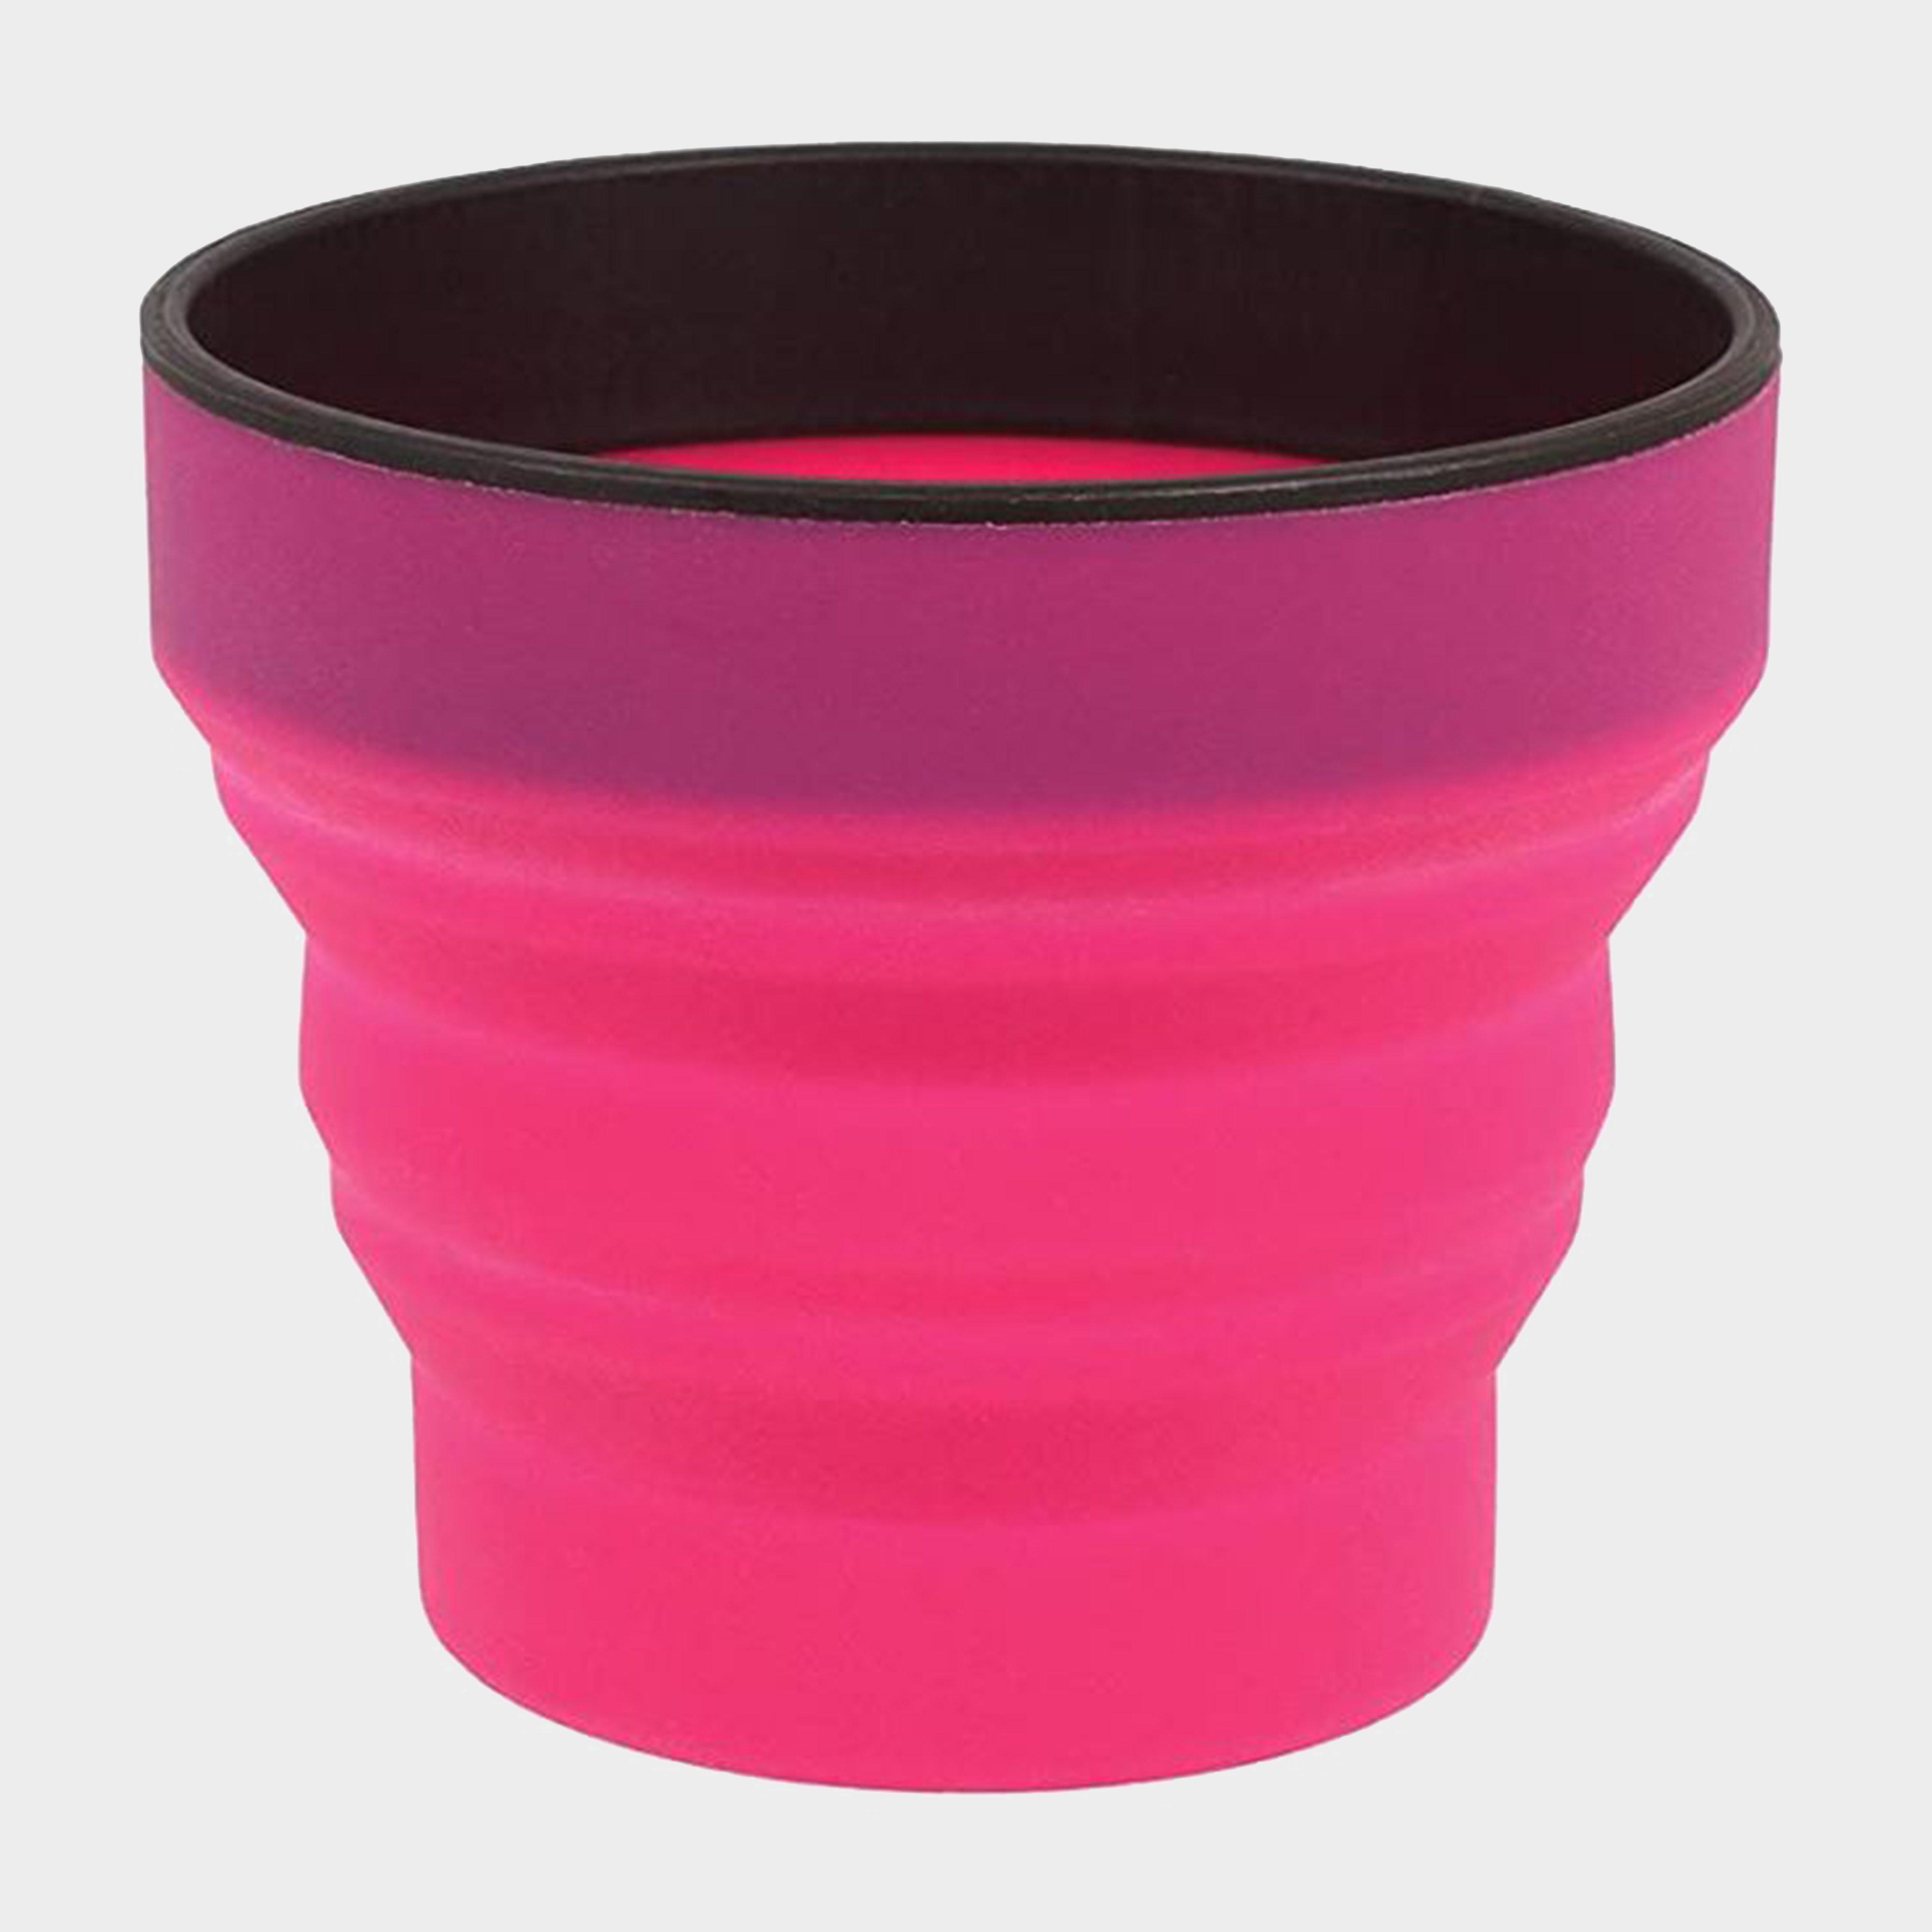 Lifeventure Ellipse Collapsible Cup - Pink/pink  Pink/pink